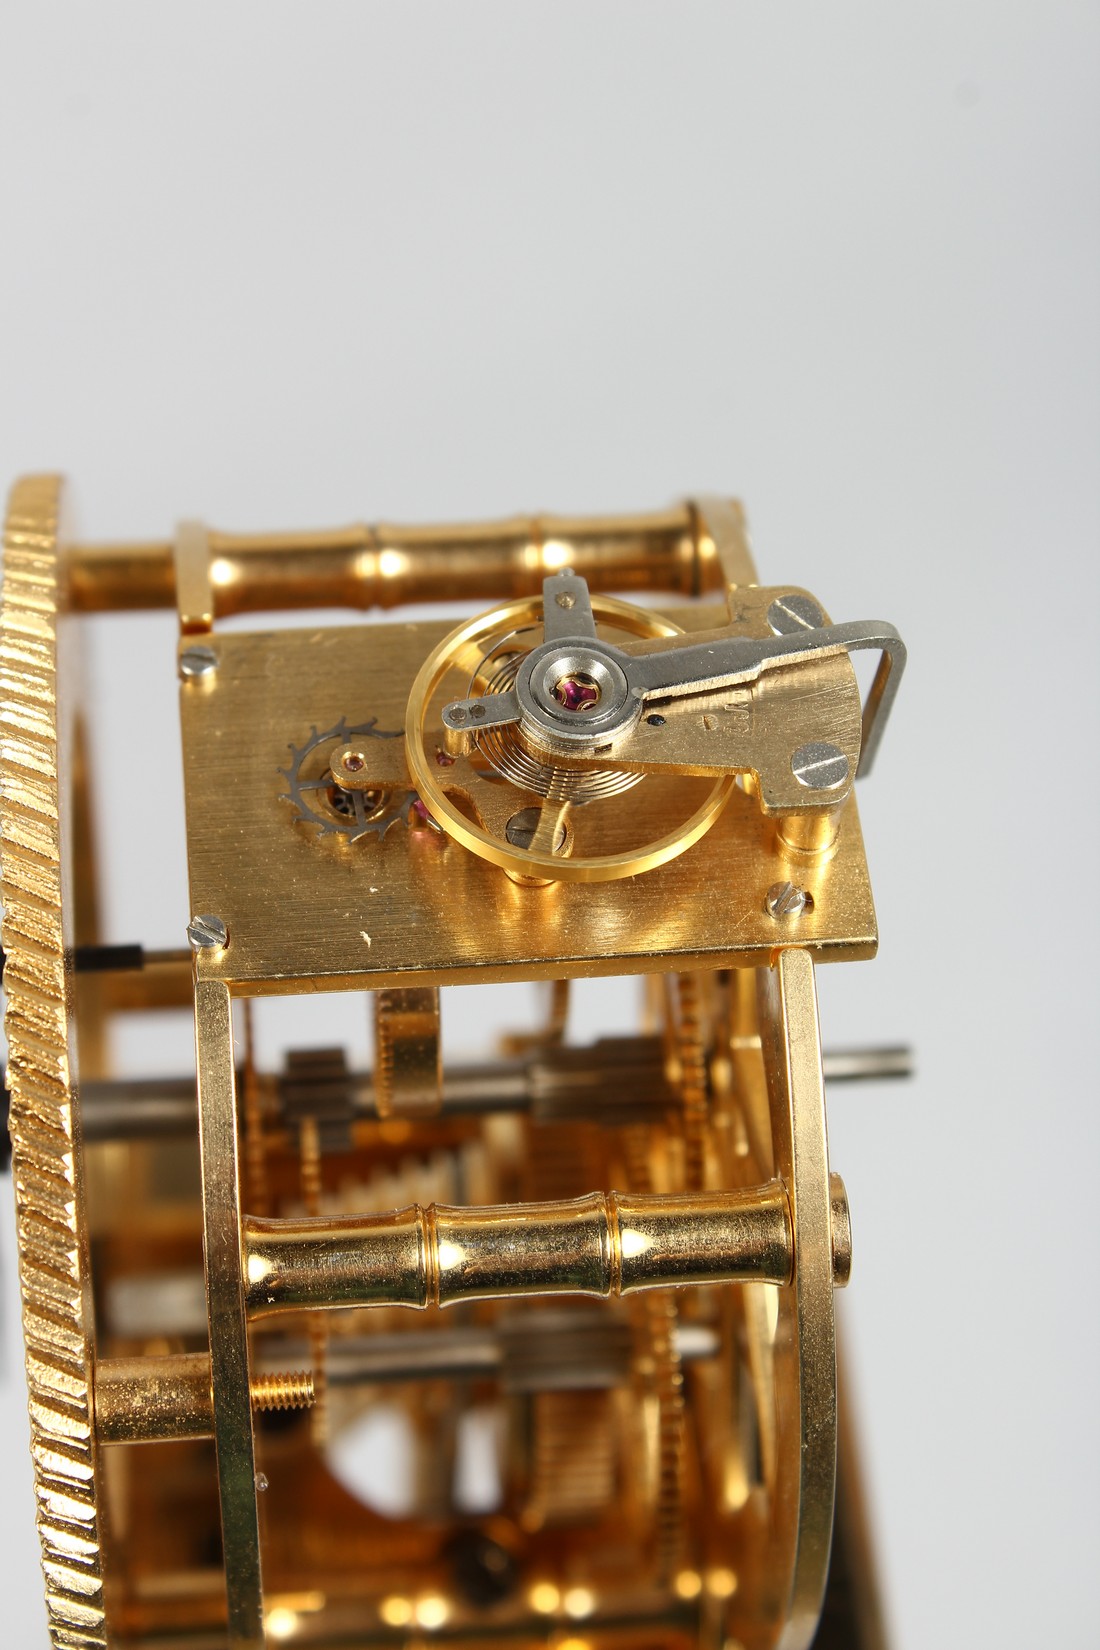 AN UNUSUAL BRASS COLUMN CLOCK with enamel dial, large spring driven movement, under a glass dome. - Image 2 of 4